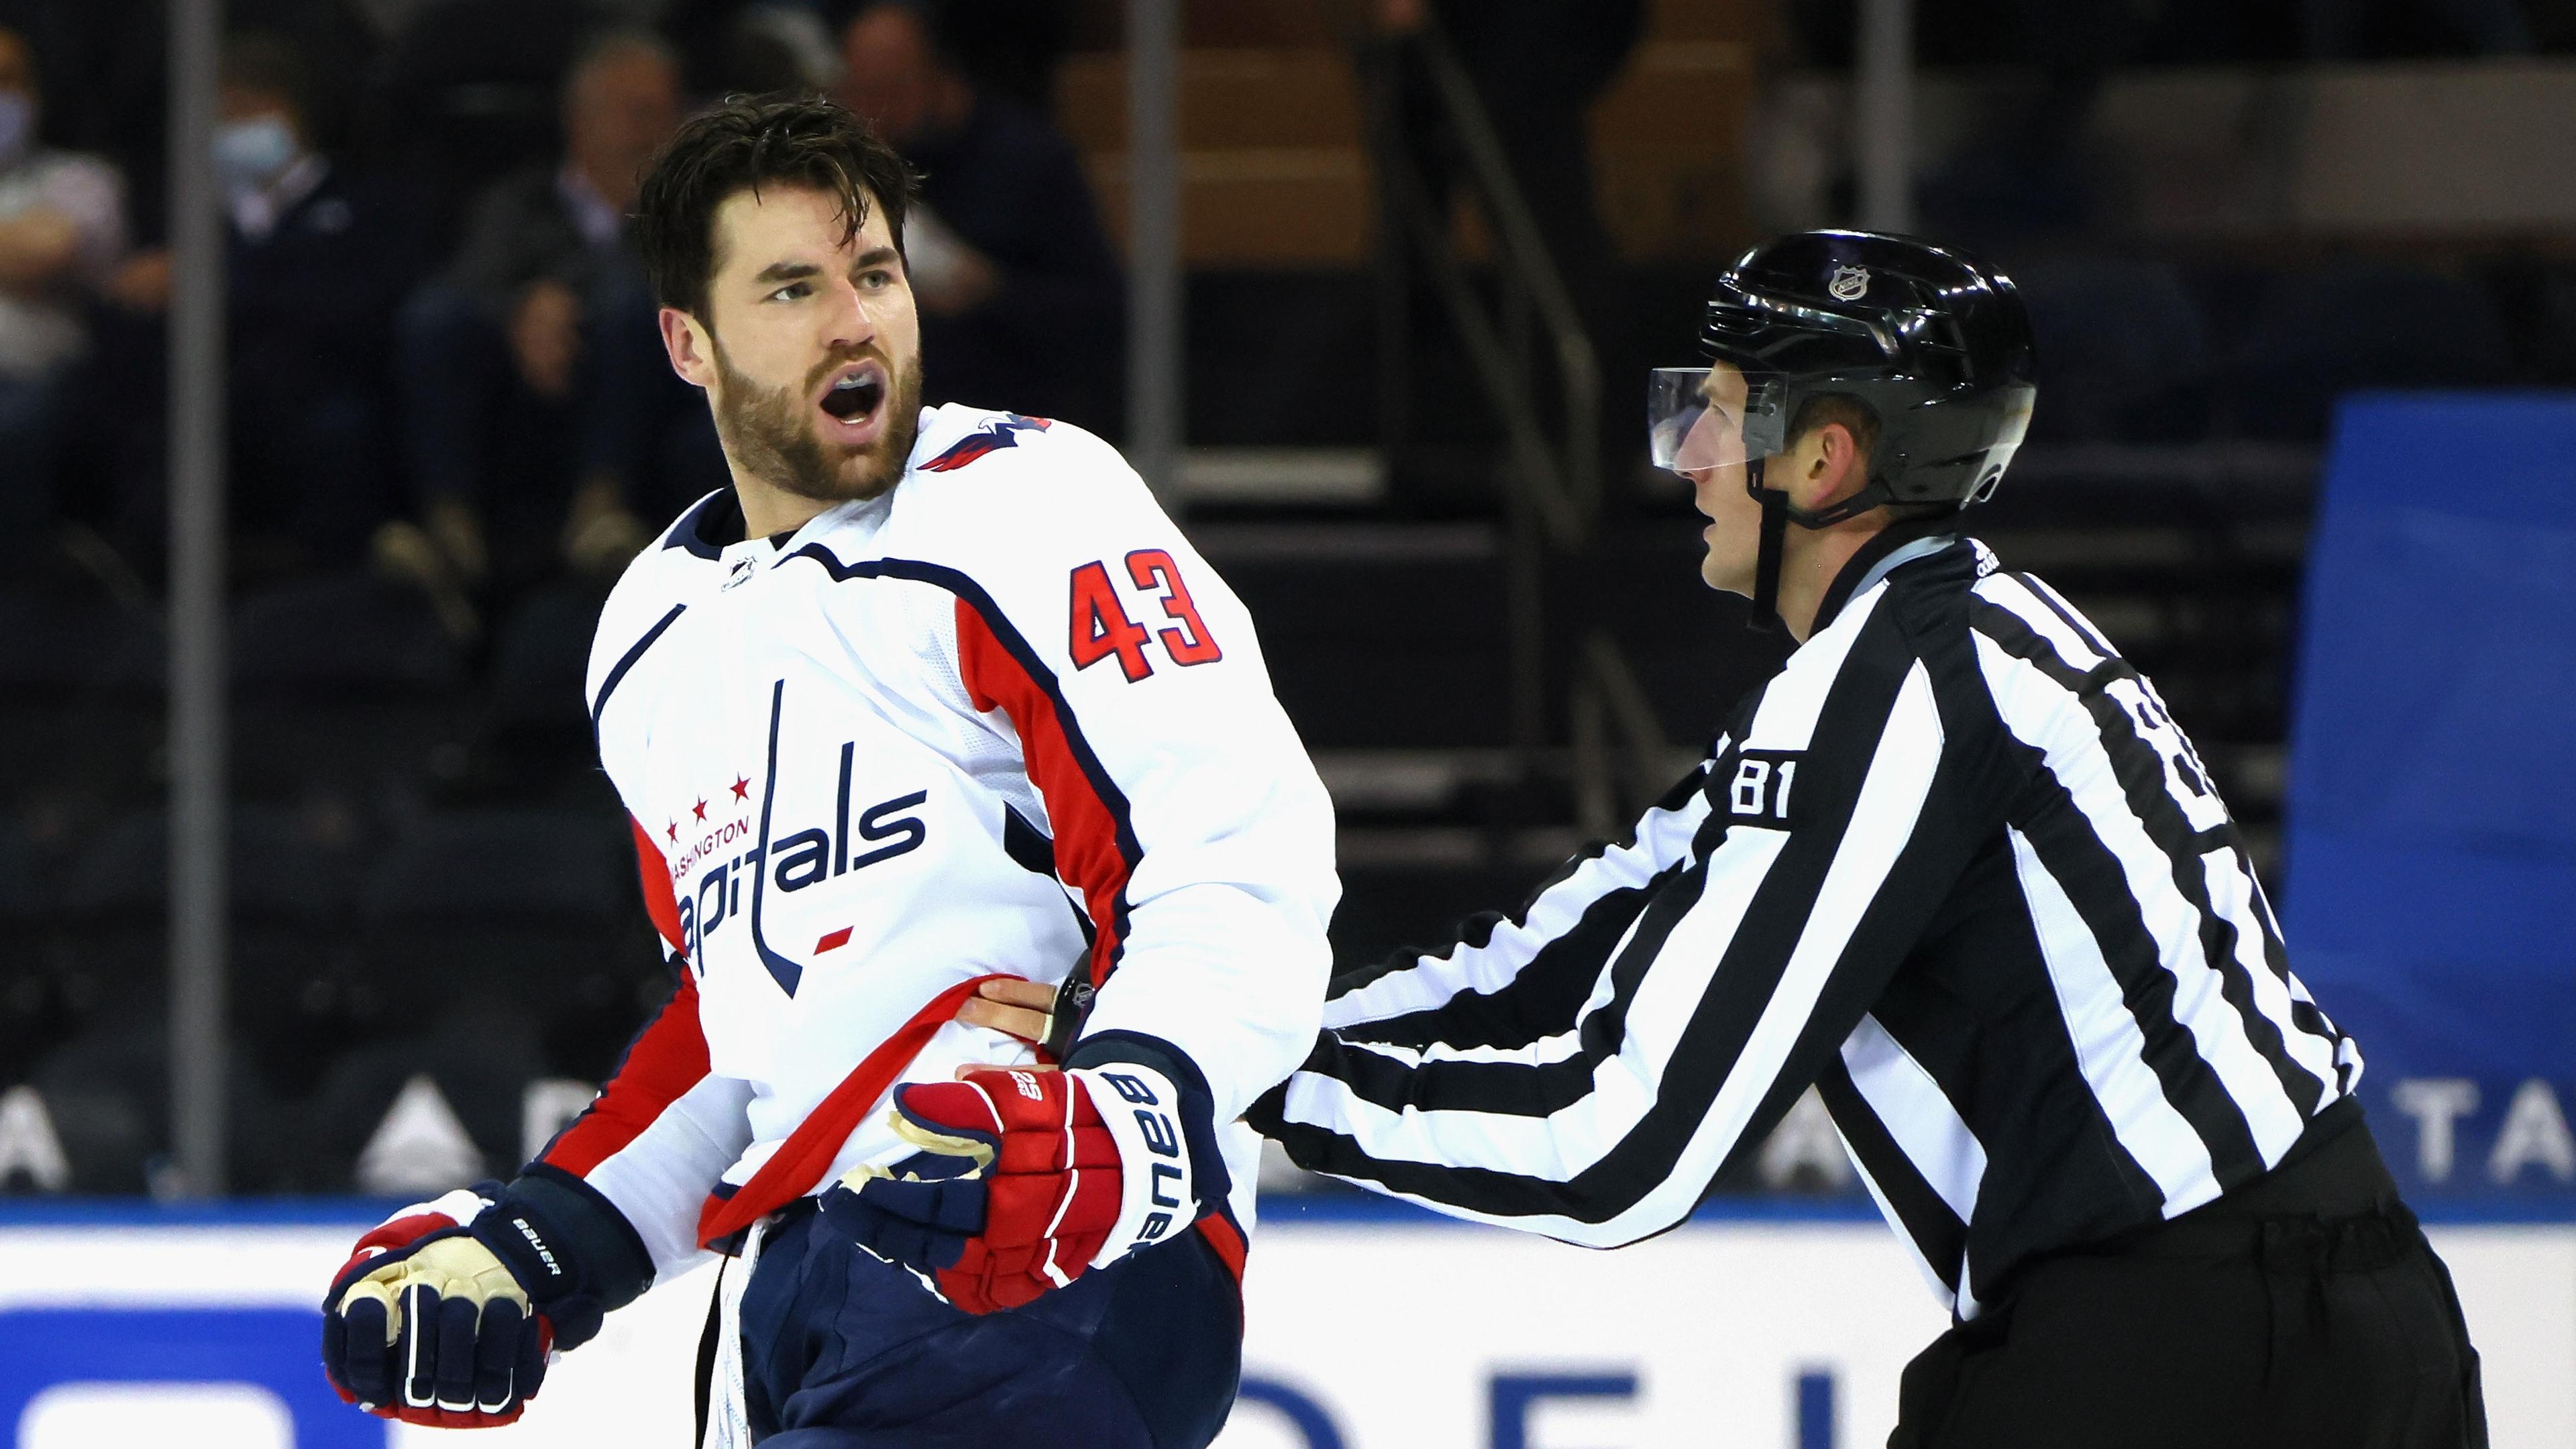 Tom Wilson #43 of the Washington Capitals yells at the New York Rangers bench after taking a second period penalty at Madison Square Garden. / Bruce Bennett-USA TODAY Sports